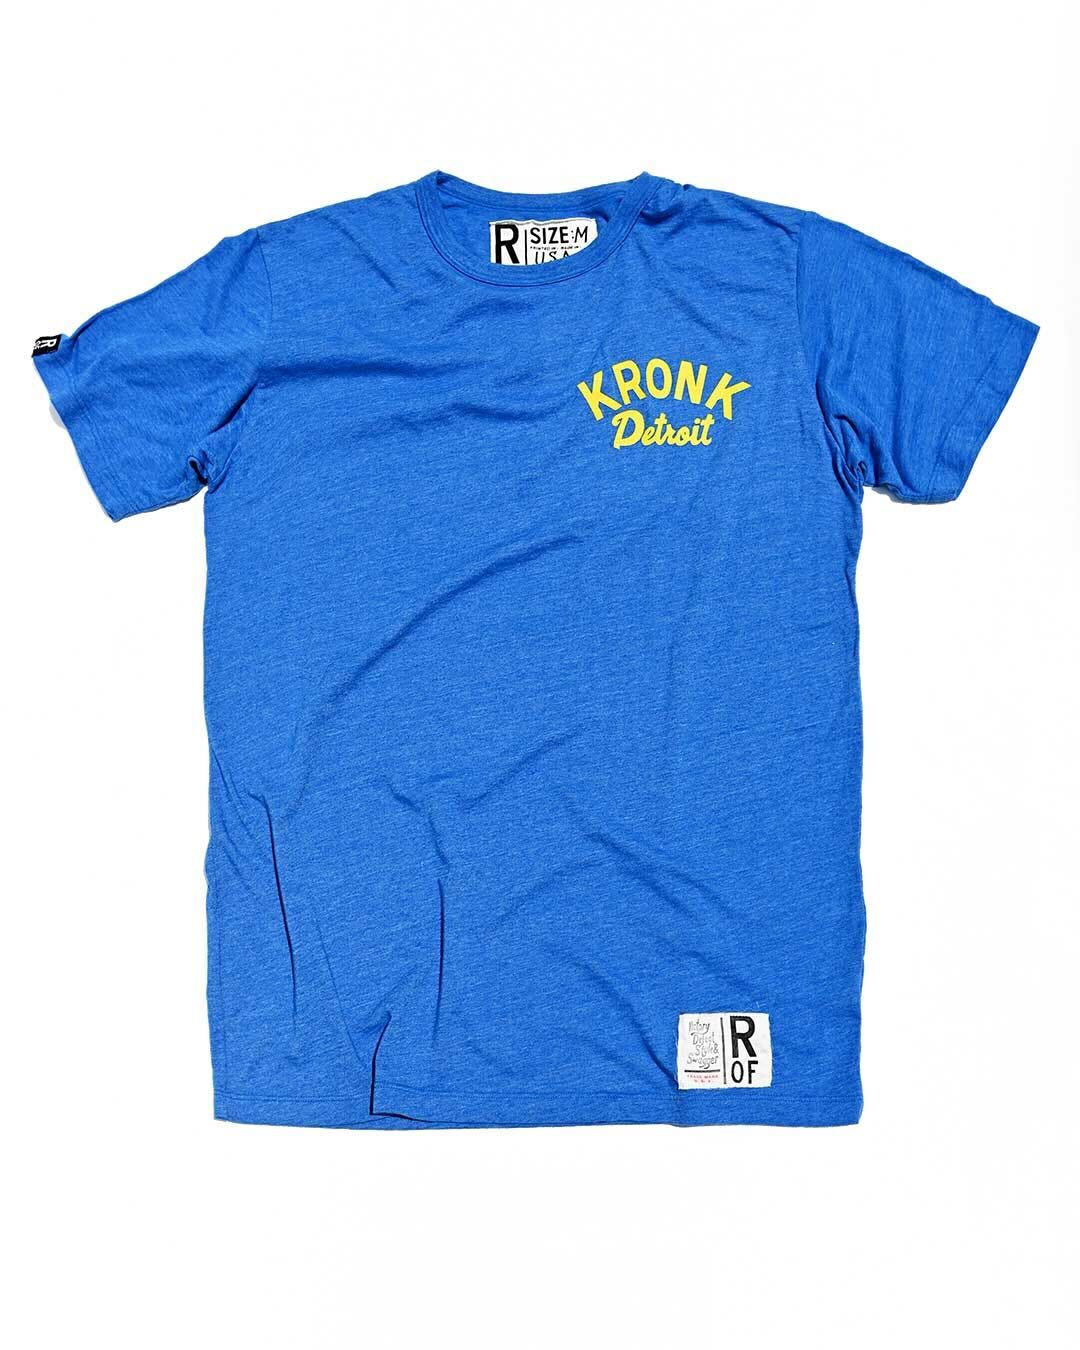 Kronk Detroit Blue Tee - Roots of Fight Canada